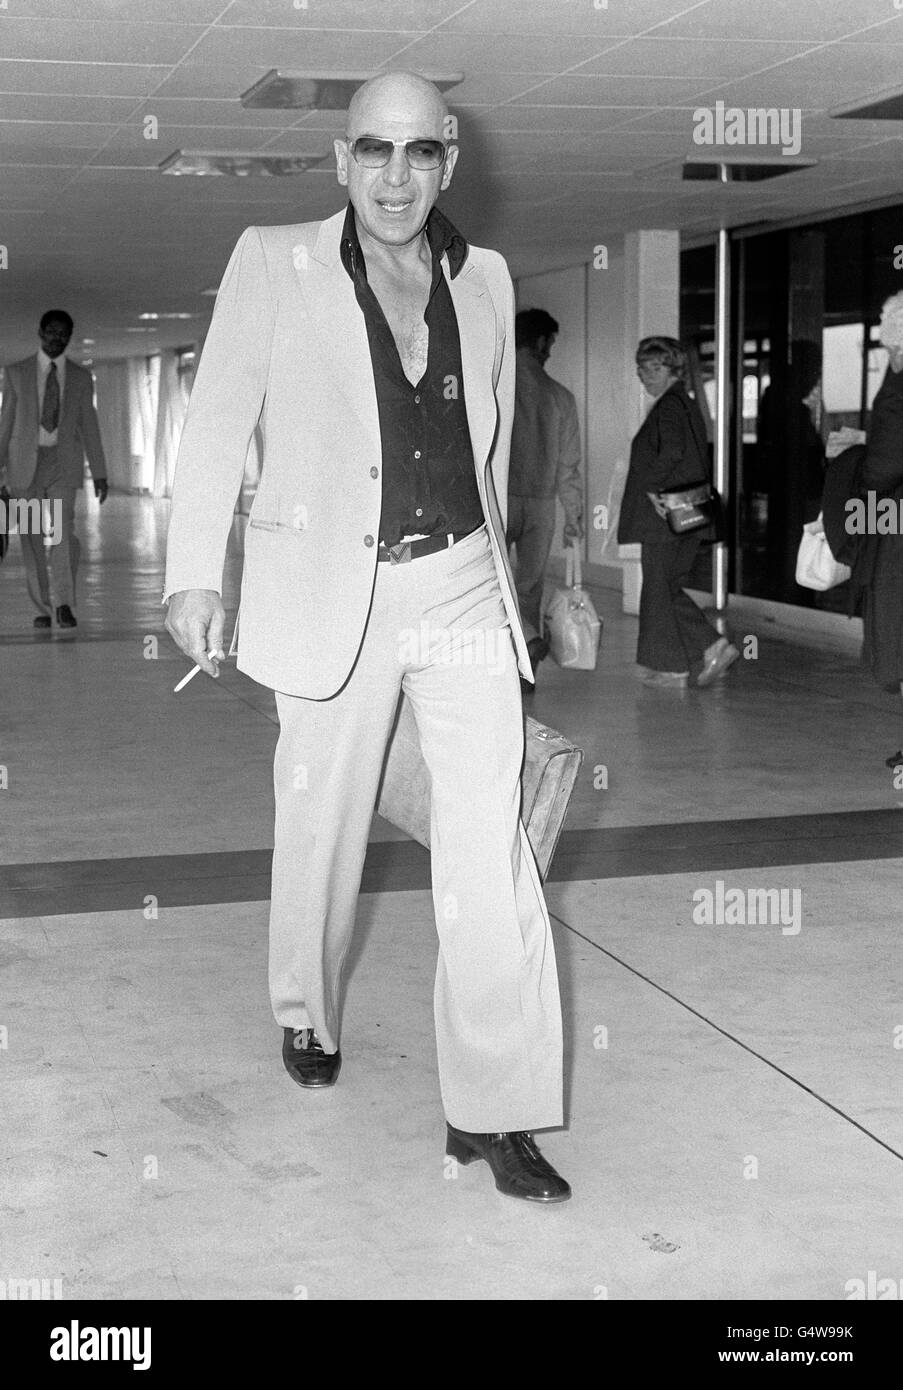 Actor Telly Savalas at London's Heathrow Airport after arriving from ...